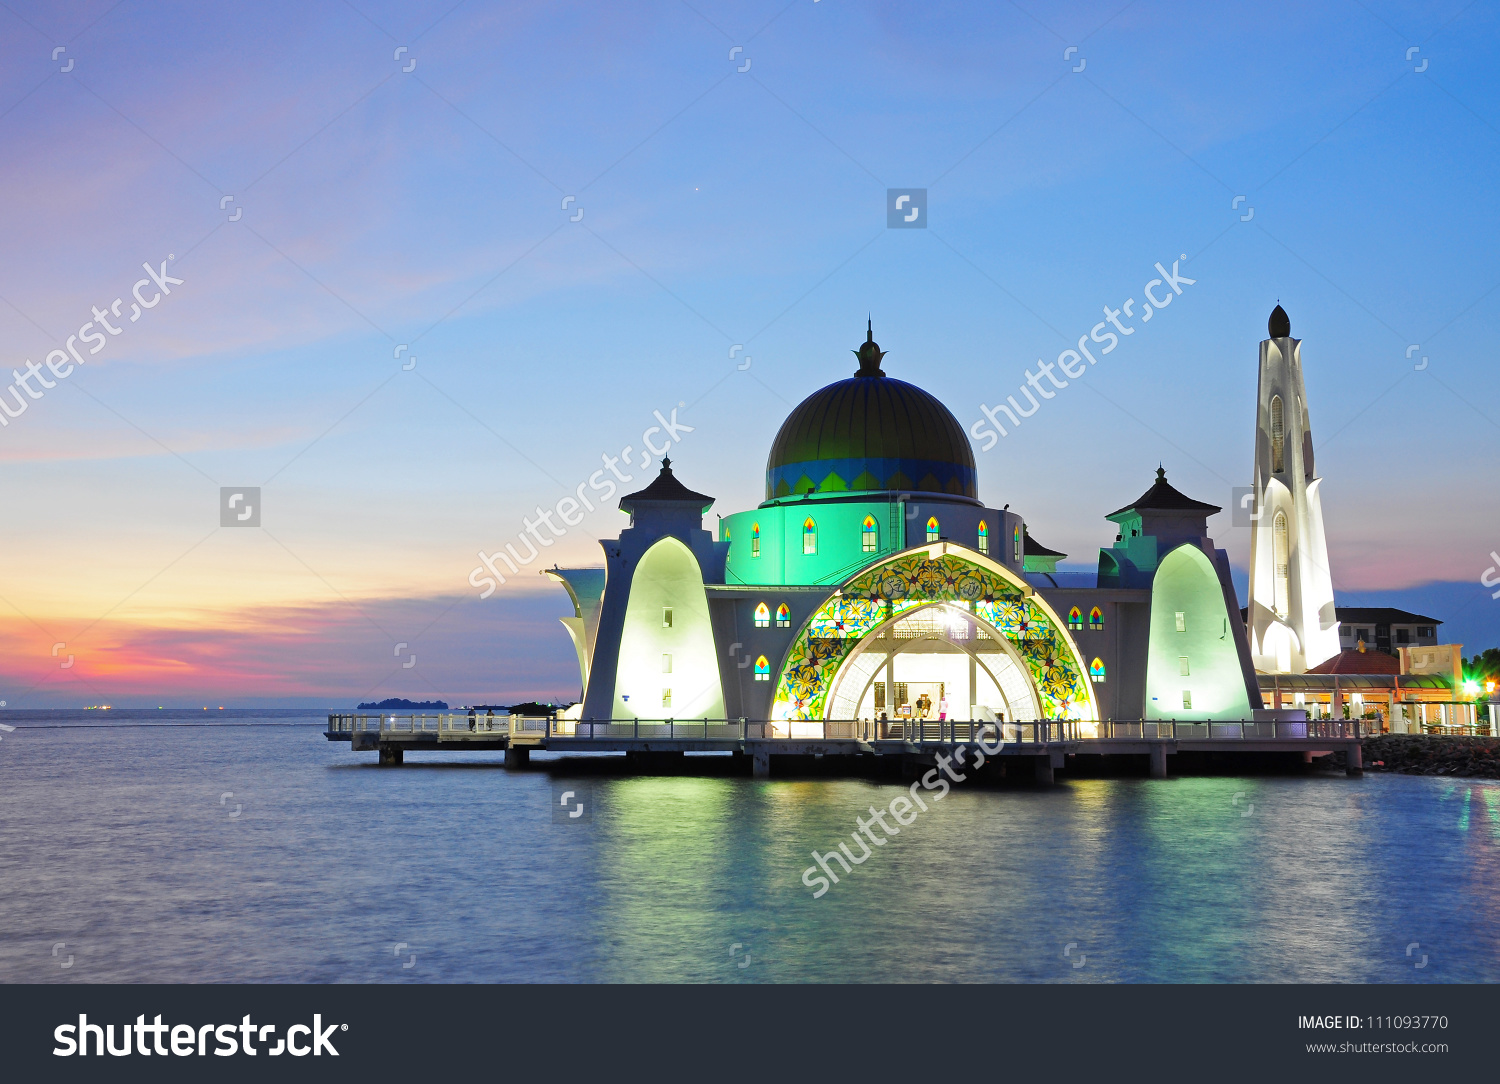 Images of Malacca Straits Mosque | 1500x1084